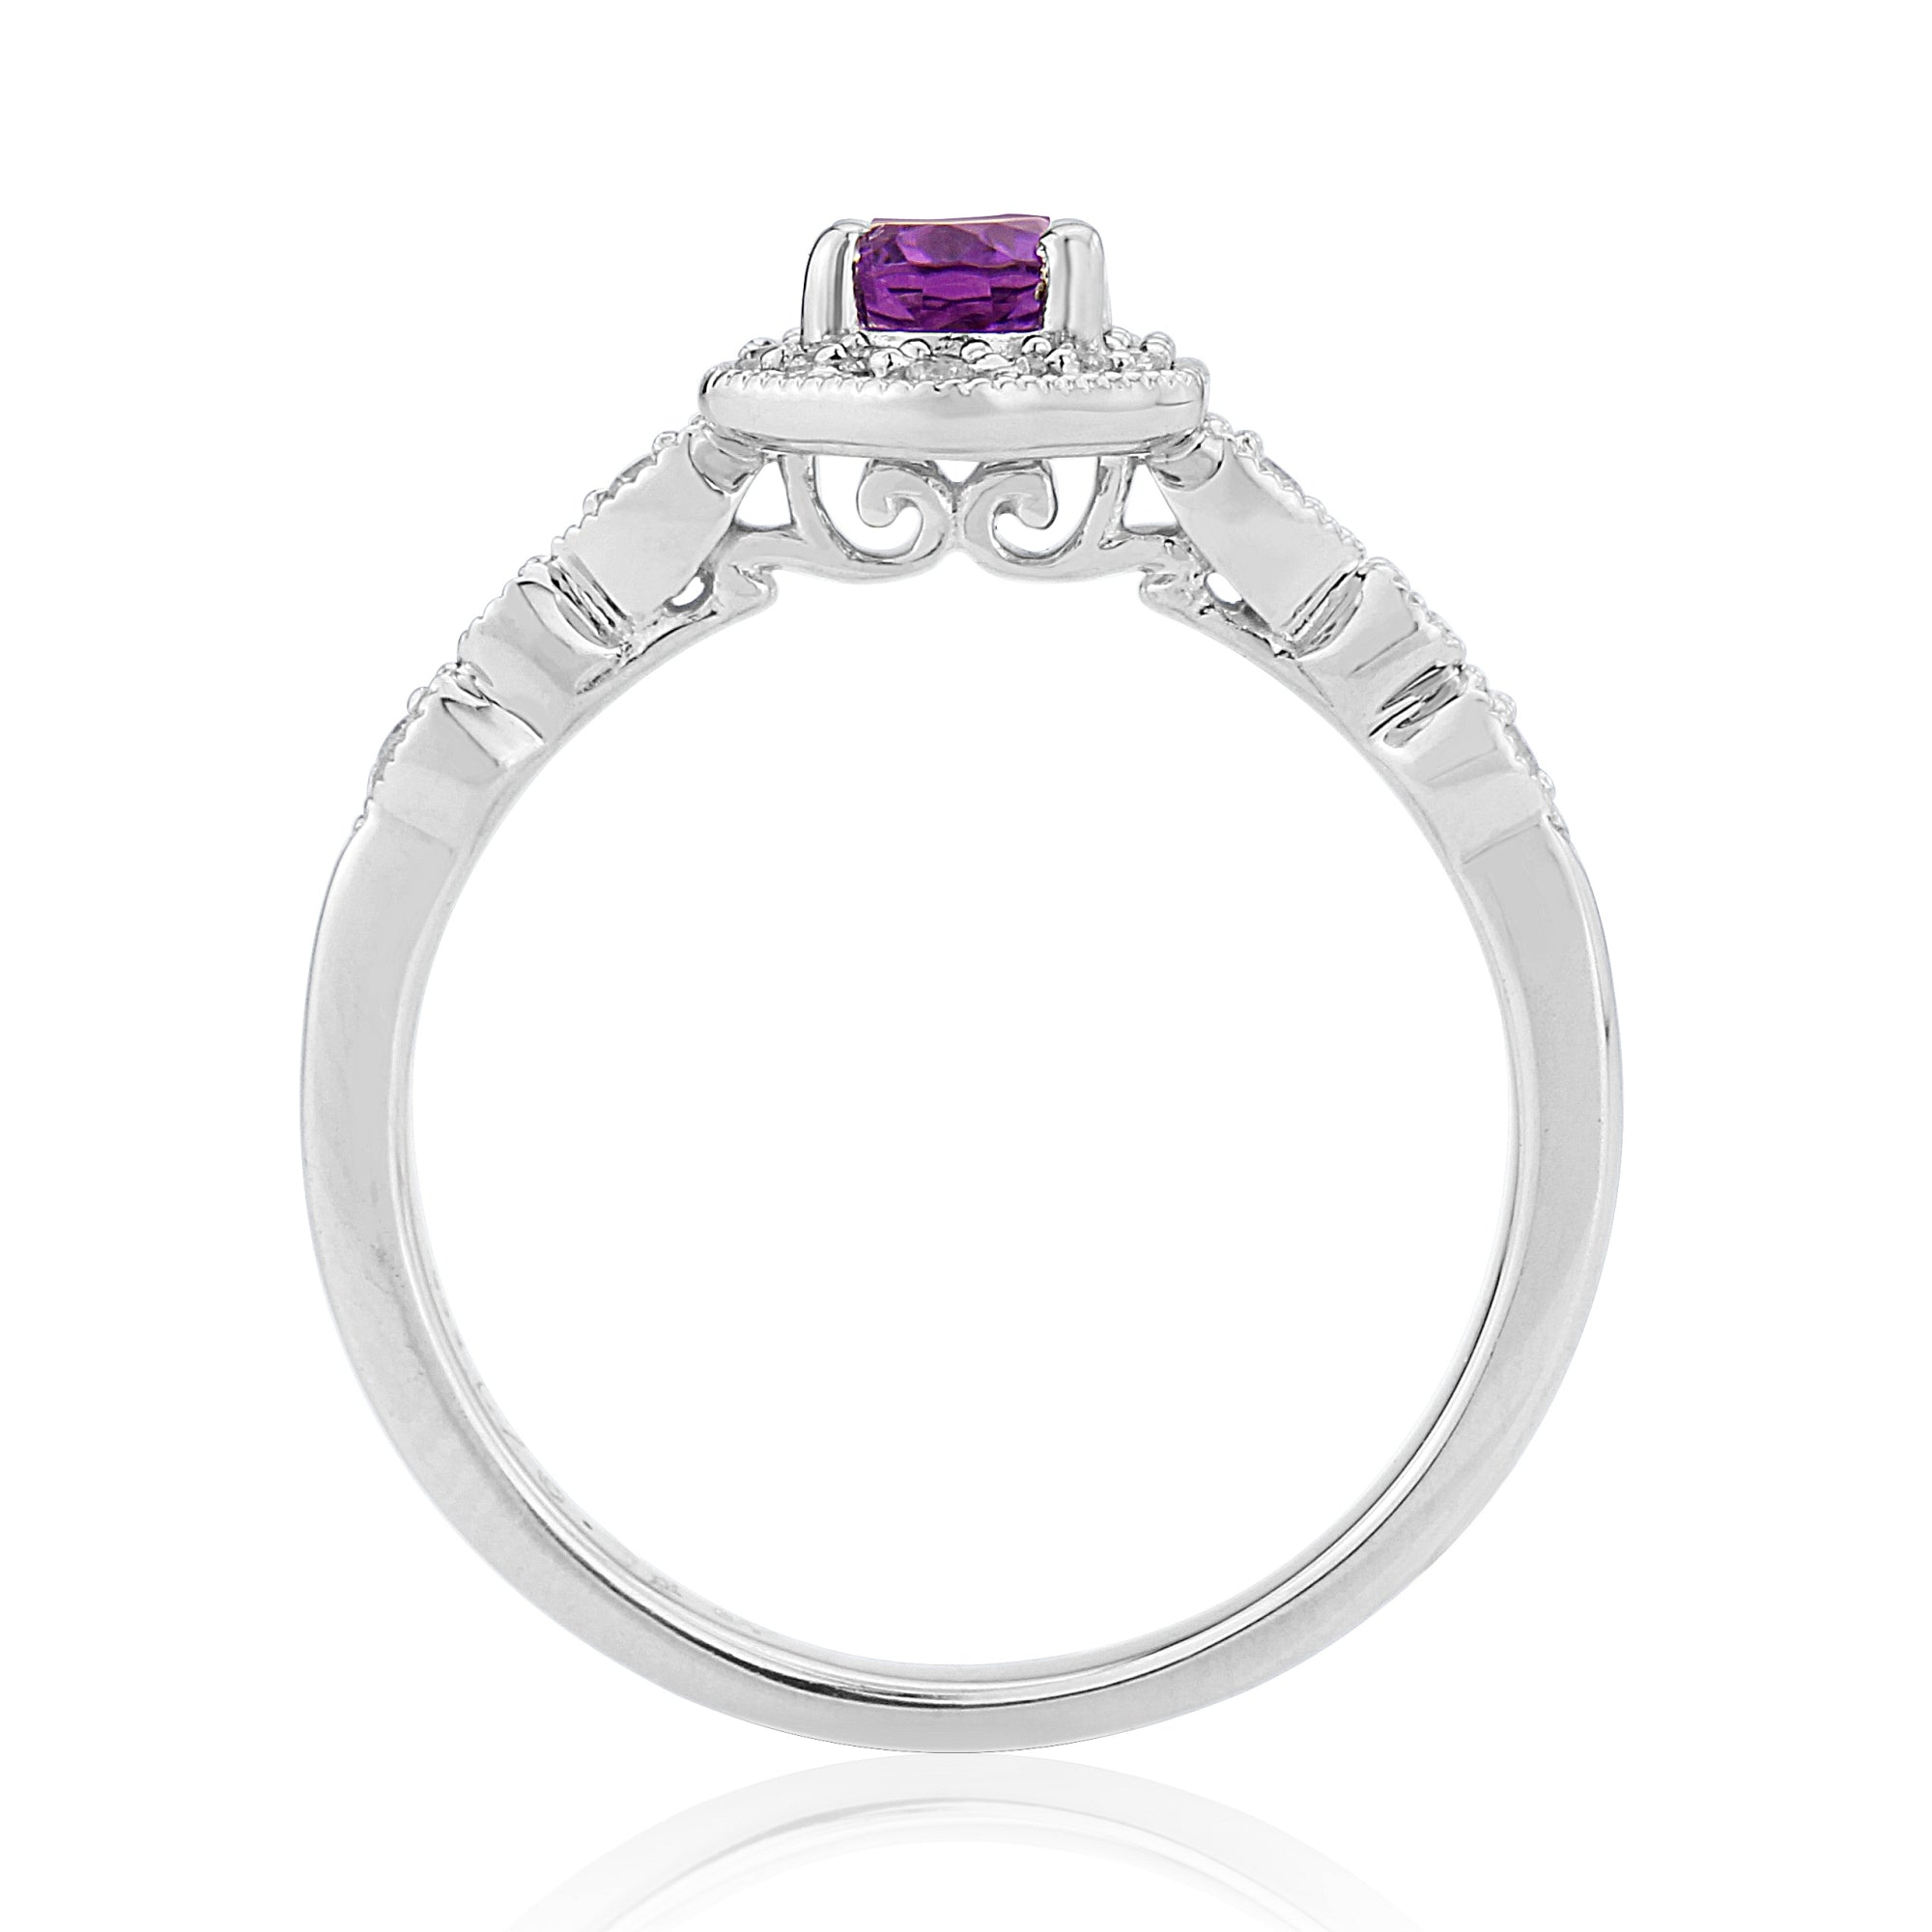 9ct white gold 6x4mm oval amethyst & diamond cluster ring 0.12ct